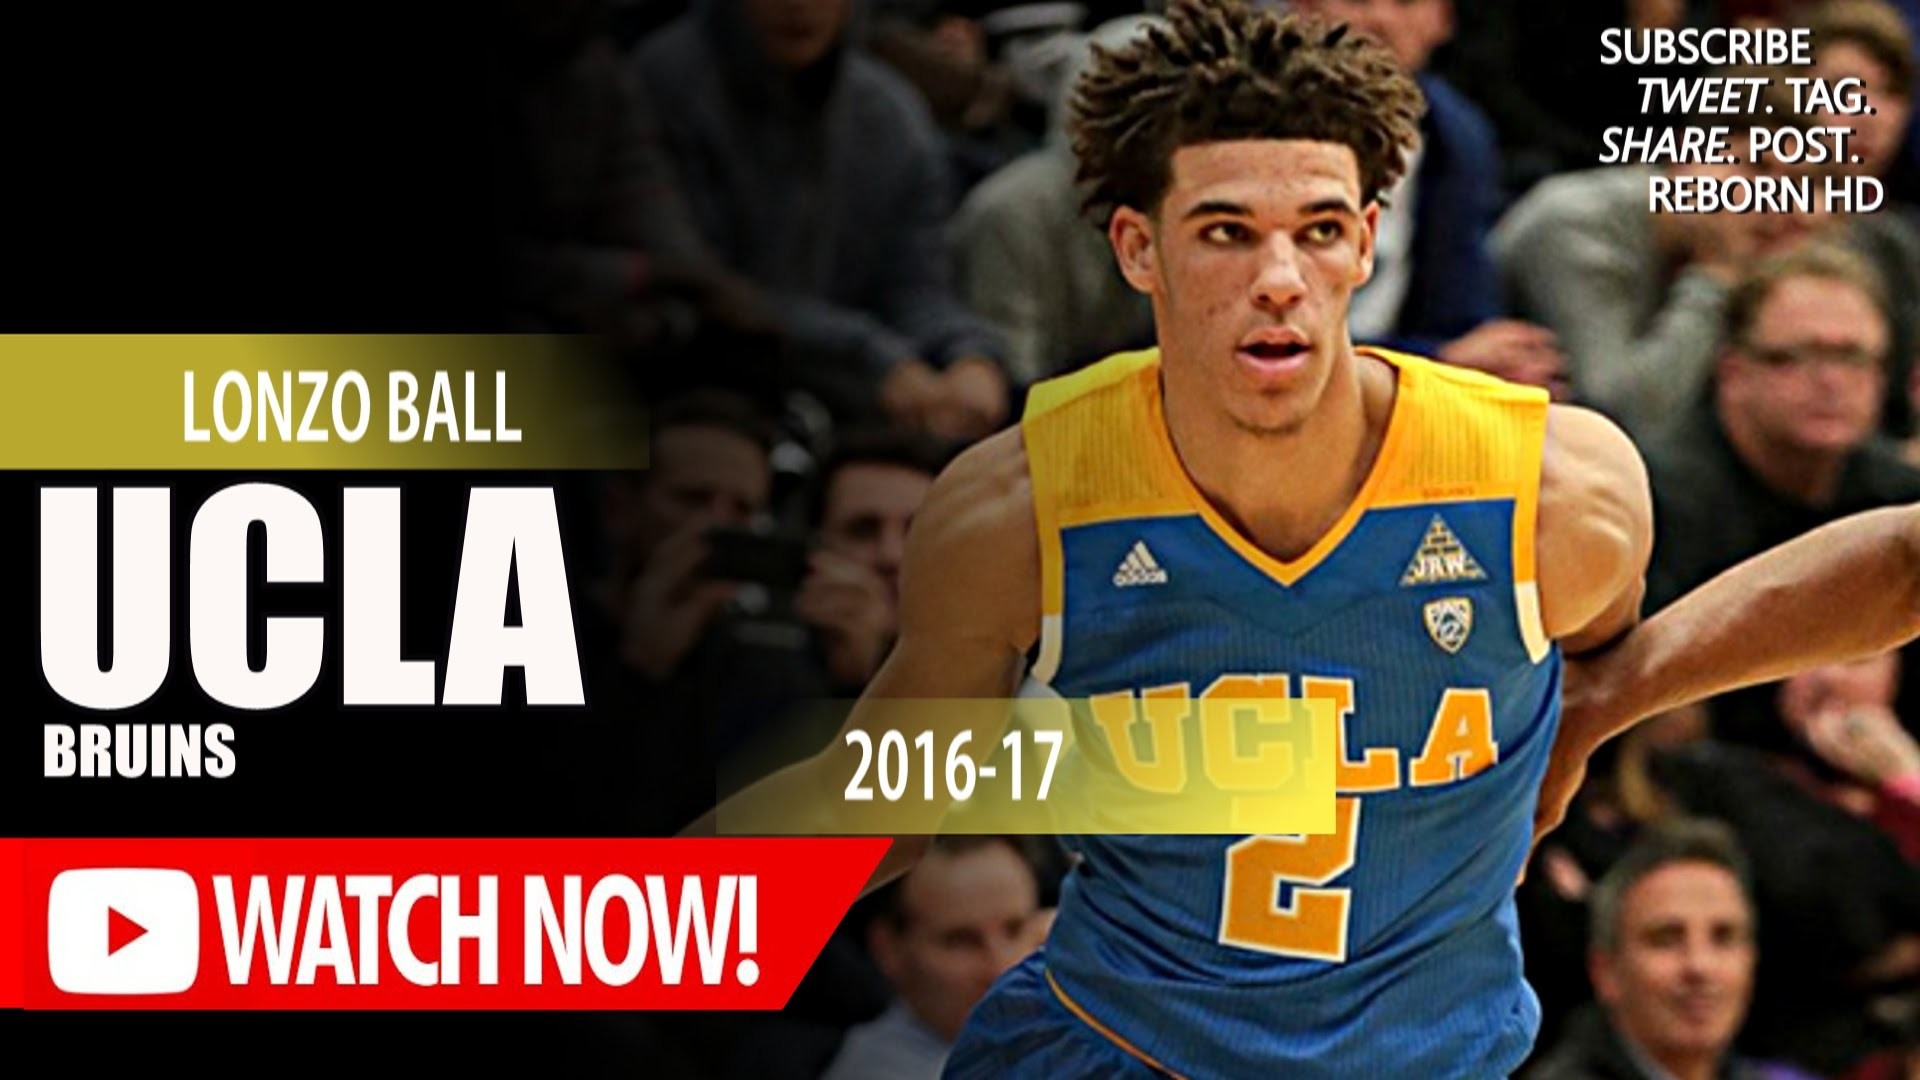 1920x1080 Lonzo Ball UCLA Full PS Highlights 8.23.2016 vs. Sydney Lions - 9 Pts, 4  Assist in UCLA Debut! - YouTube